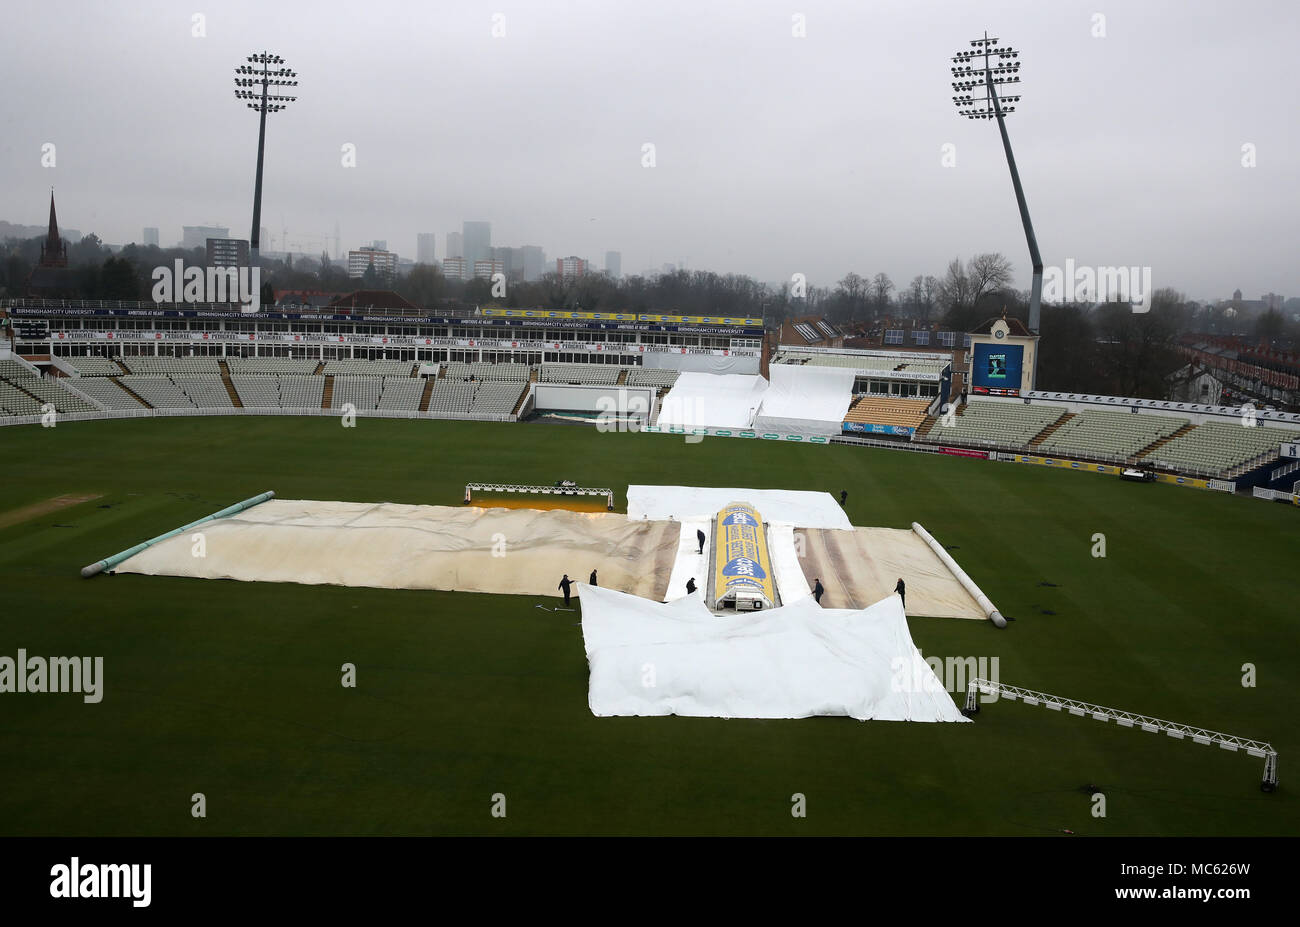 The ground staff move covers on to protect the wicket on the 1st day morning of the County season during the Specsavers County Championship Division Two match at Edgbaston, Birmingham. PRESS ASSOCIATION Photo. Picture date: Friday April 13, 2018. See PA story CRICKET Warwickshire. Photo credit should read: Nick Potts/PA Wire. RESTRICTIONS: Editorial use only. No commercial use without prior written consent of the ECB. Still image use only. No moving images to emulate broadcast. No removing or obscuring of sponsor logos. Stock Photo